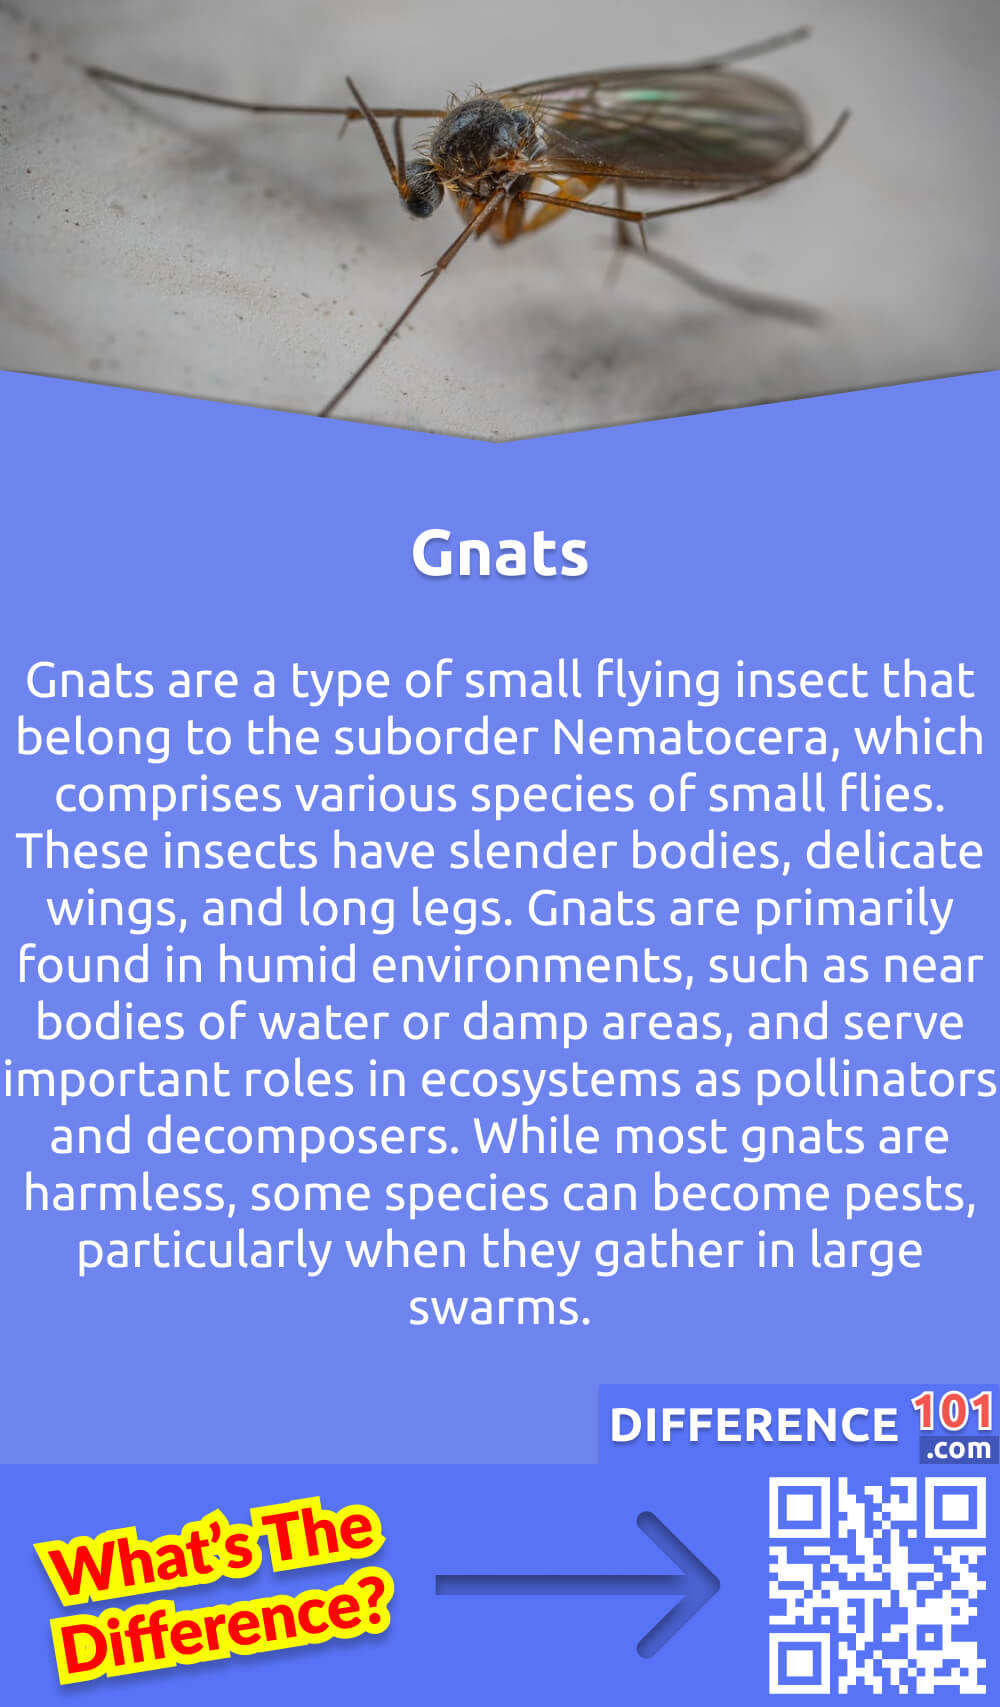 What Are Gnats? Gnats are a type of small flying insect that belong to the suborder Nematocera, which comprises various species of small flies. These insects have slender bodies, delicate wings, and long legs. Gnats are primarily found in humid environments, such as near bodies of water or damp areas, and serve important roles in ecosystems as pollinators and decomposers. While most gnats are harmless, some species can become pests, particularly when they gather in large swarms. Certain types of gnats, such as biting midges, can bite humans and other animals, causing discomfort and irritation. Gnats are attracted to moist conditions and are commonly found in outdoor locations, including gardens and forests.